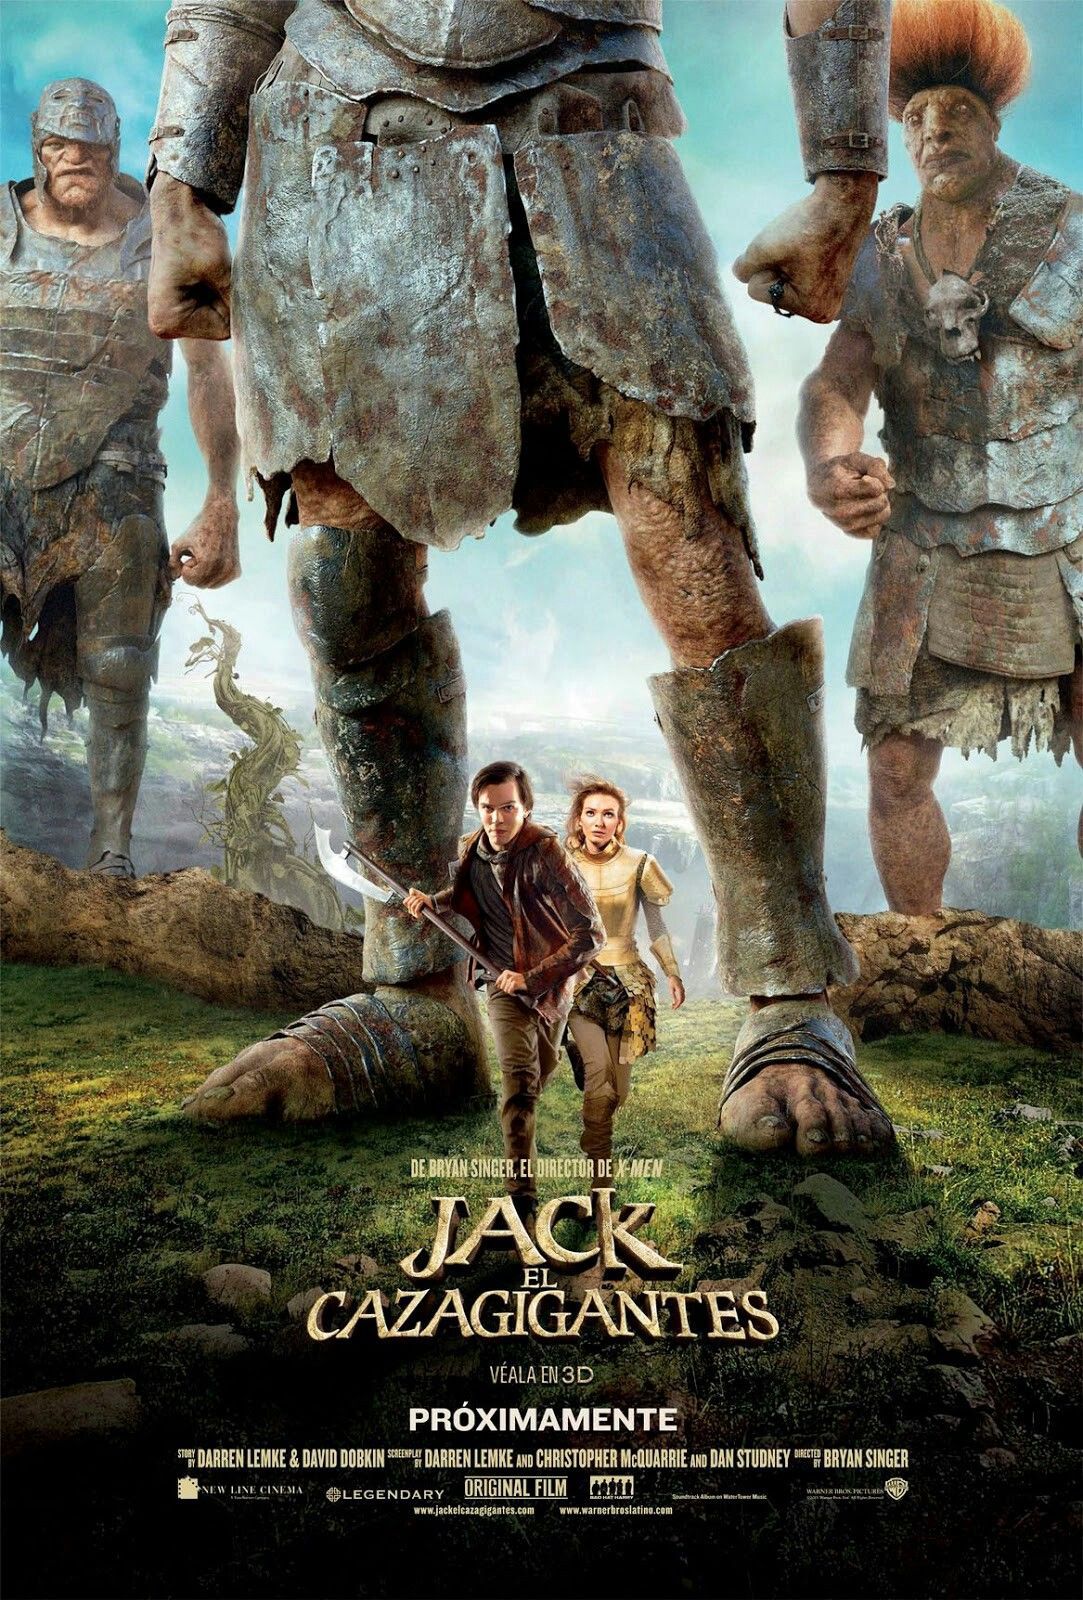 Jack El Cazagigantes [2013]. Jack the giant slayer, New movie posters, Watch free movies online